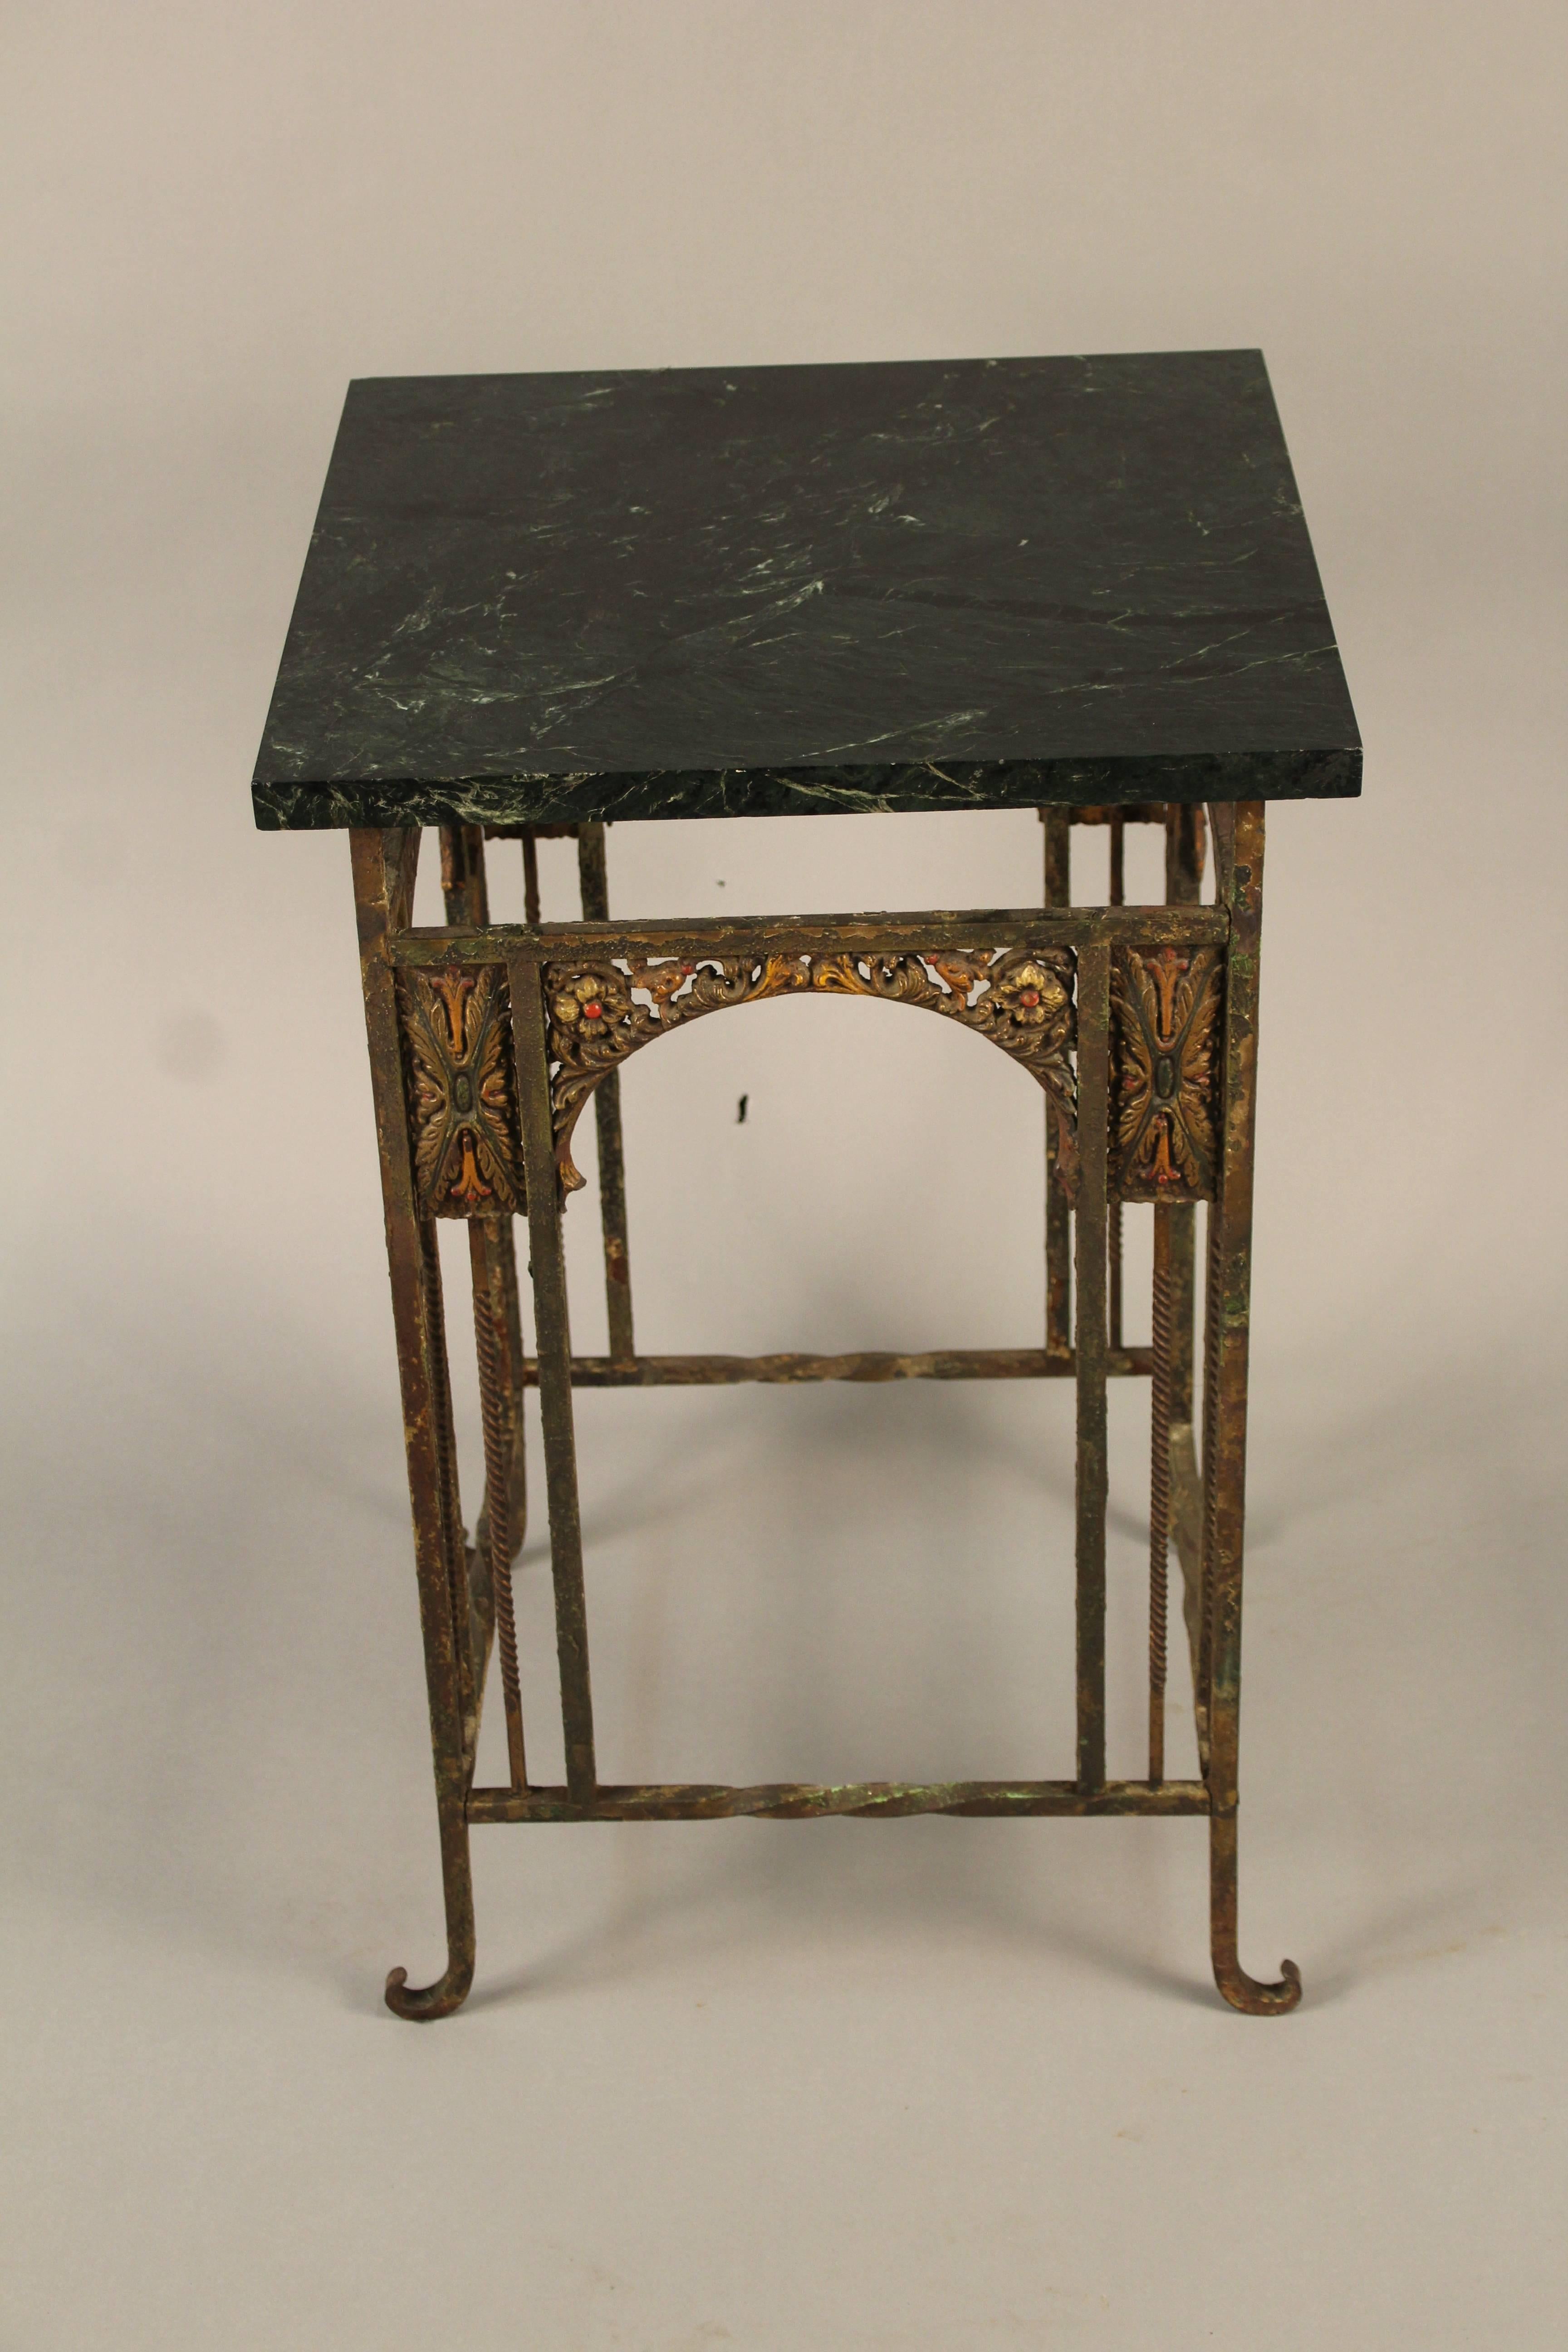 Handsome square side table with beautiful polychrome base and veined marble top.